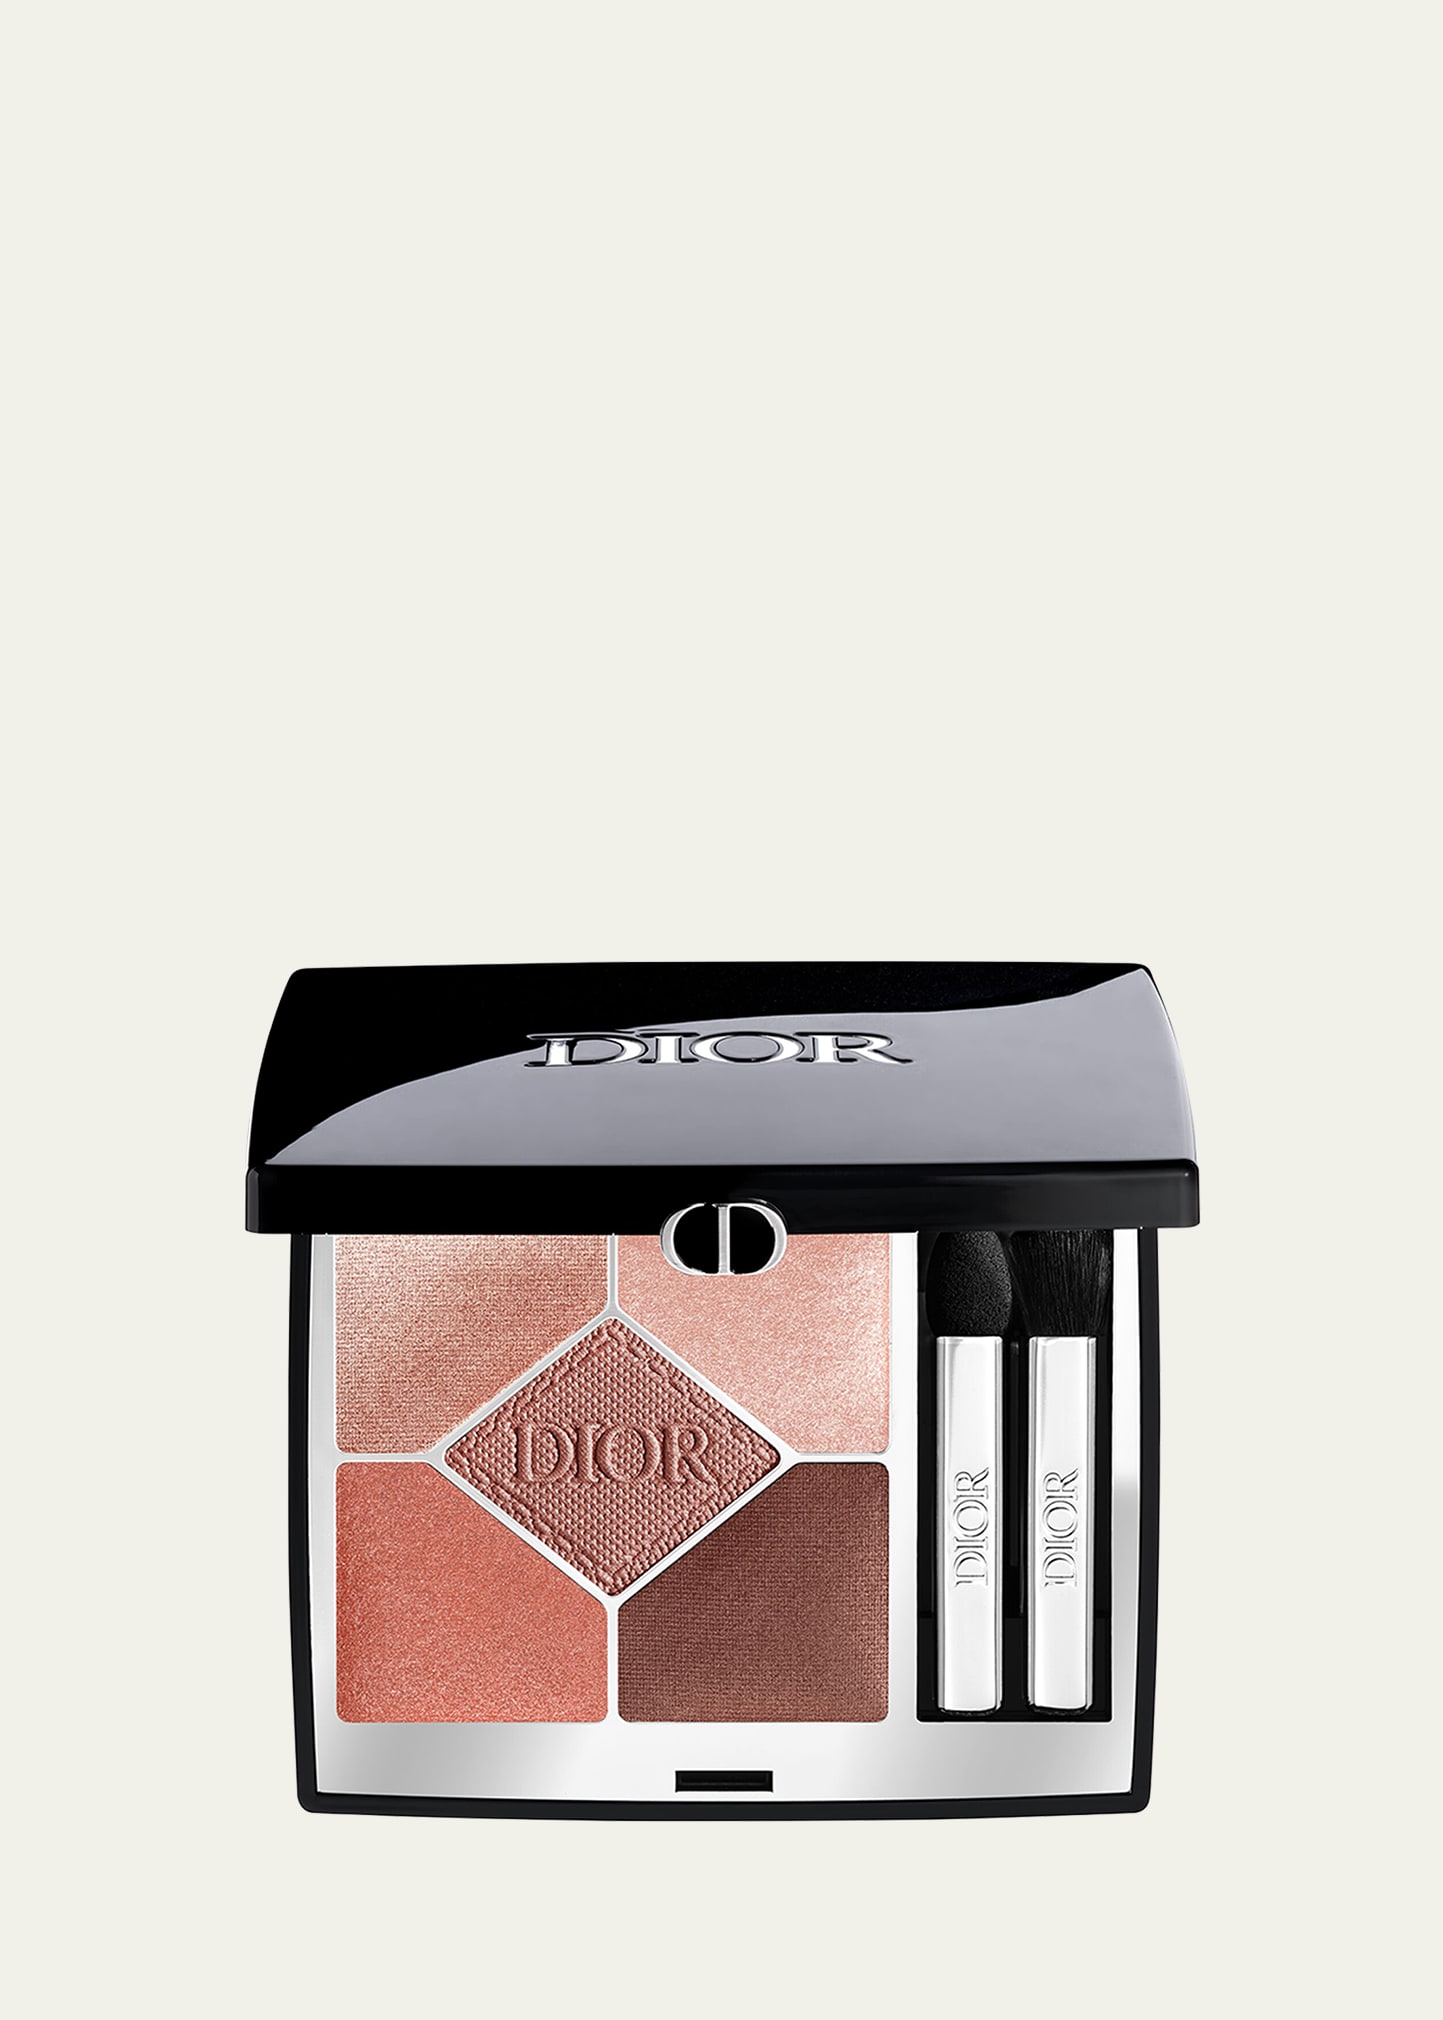 Diorshow 5 Couleurs Couture Eyeshadow Palette